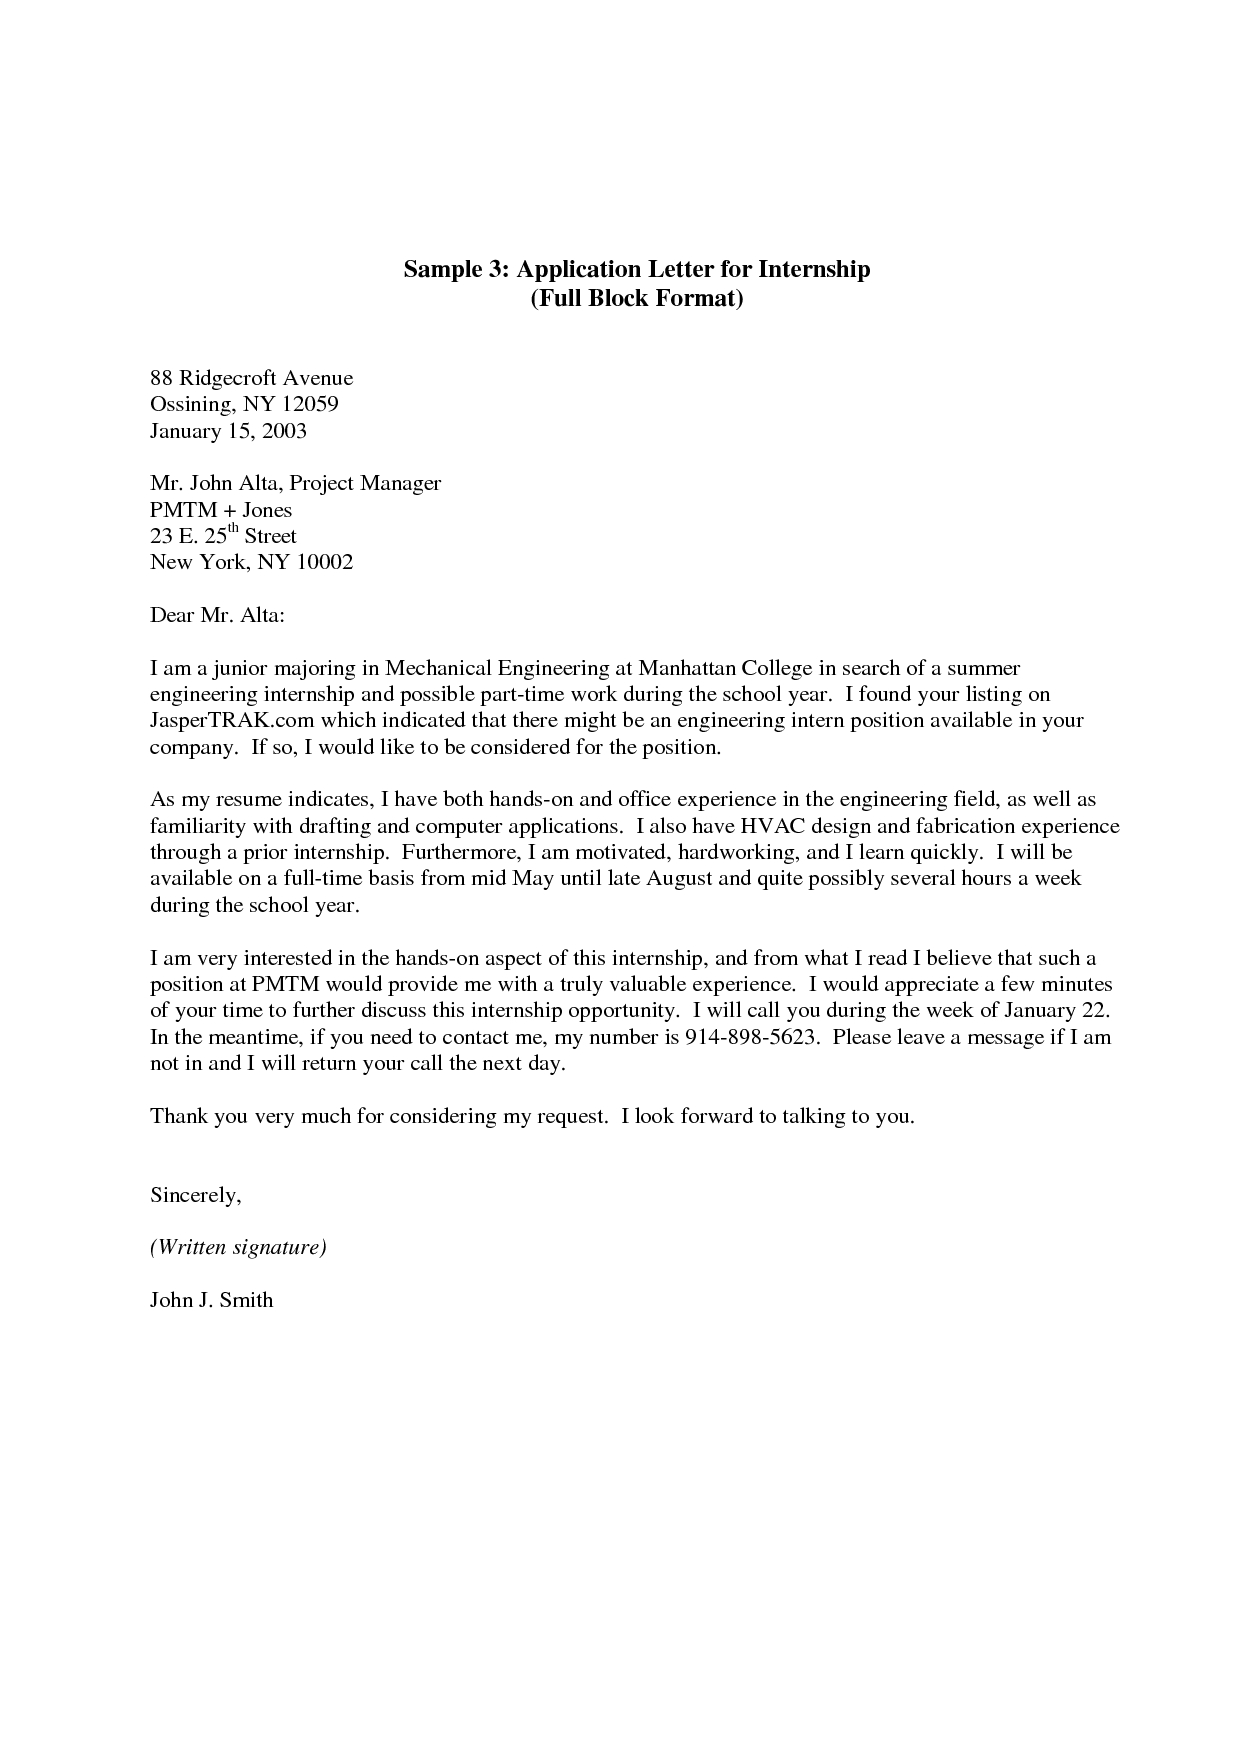 Demand Letter Template - Internship Application Letter Here is A Sample Cover Letter for